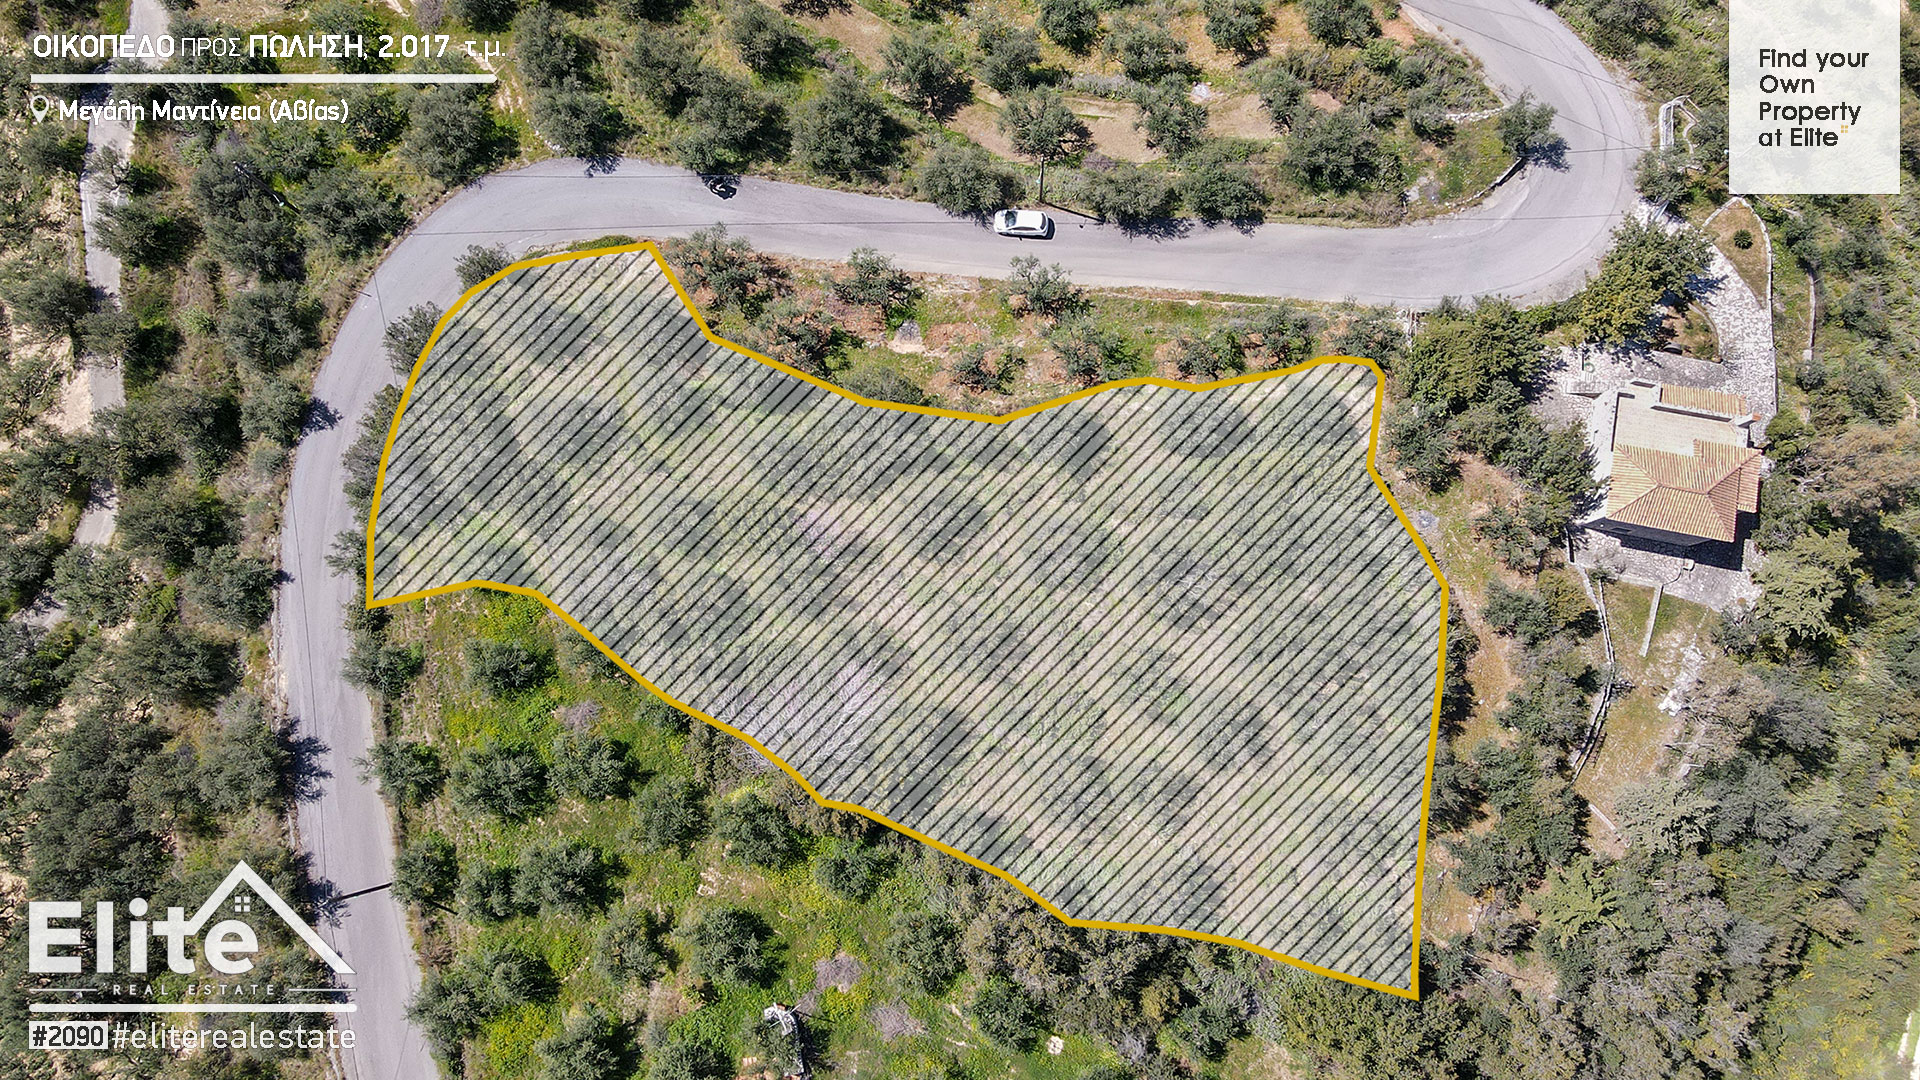 Land for sale in Megali Mantineia (Avia)